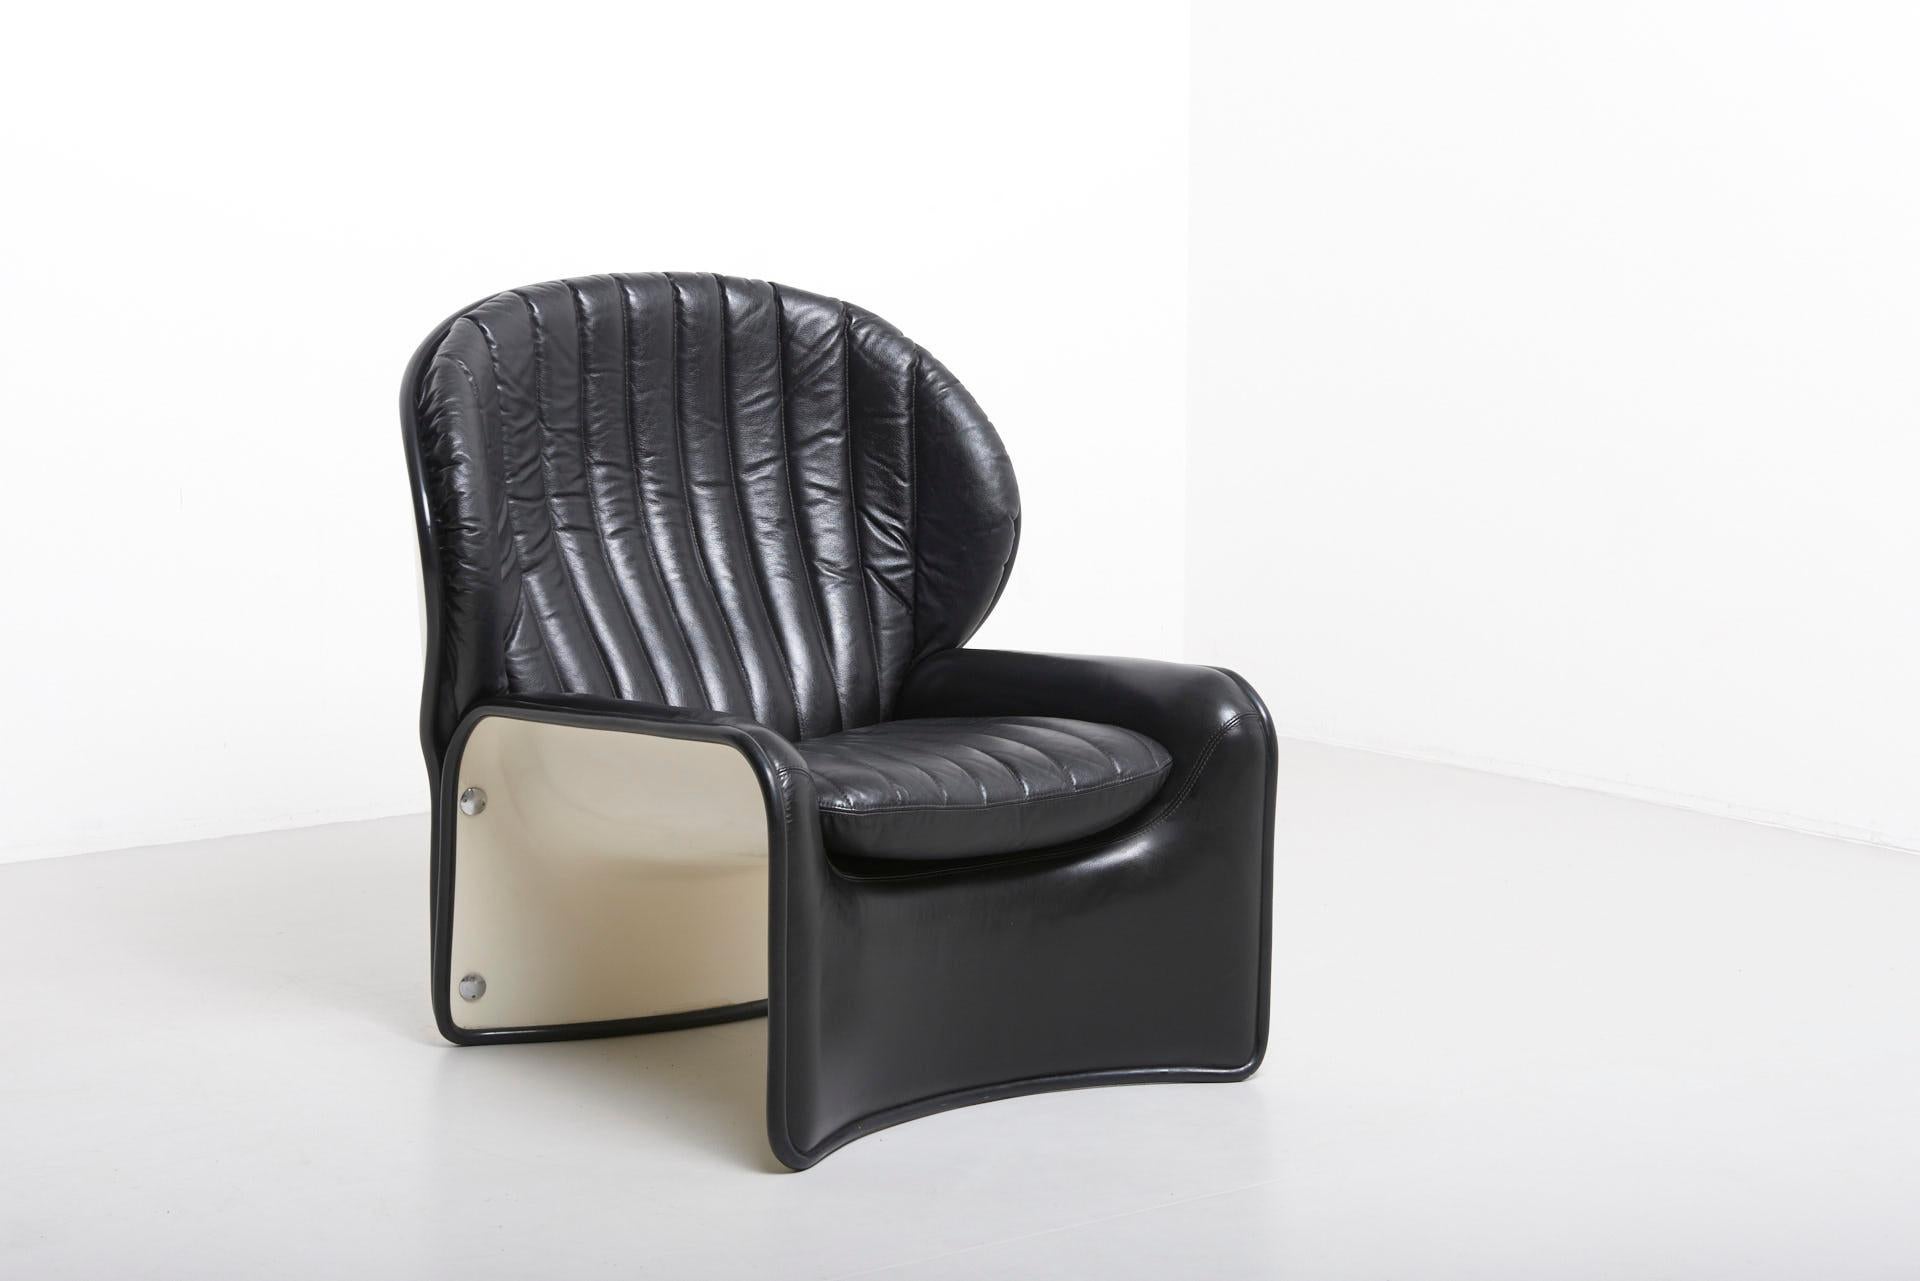 'Lotus' chair in white lacquered polyester with soft black leather upholstery. Made in the 1970s by Belgian designer Andre Vandenbeuck and Swiss manufacturer Stässle. 6 chairs available.